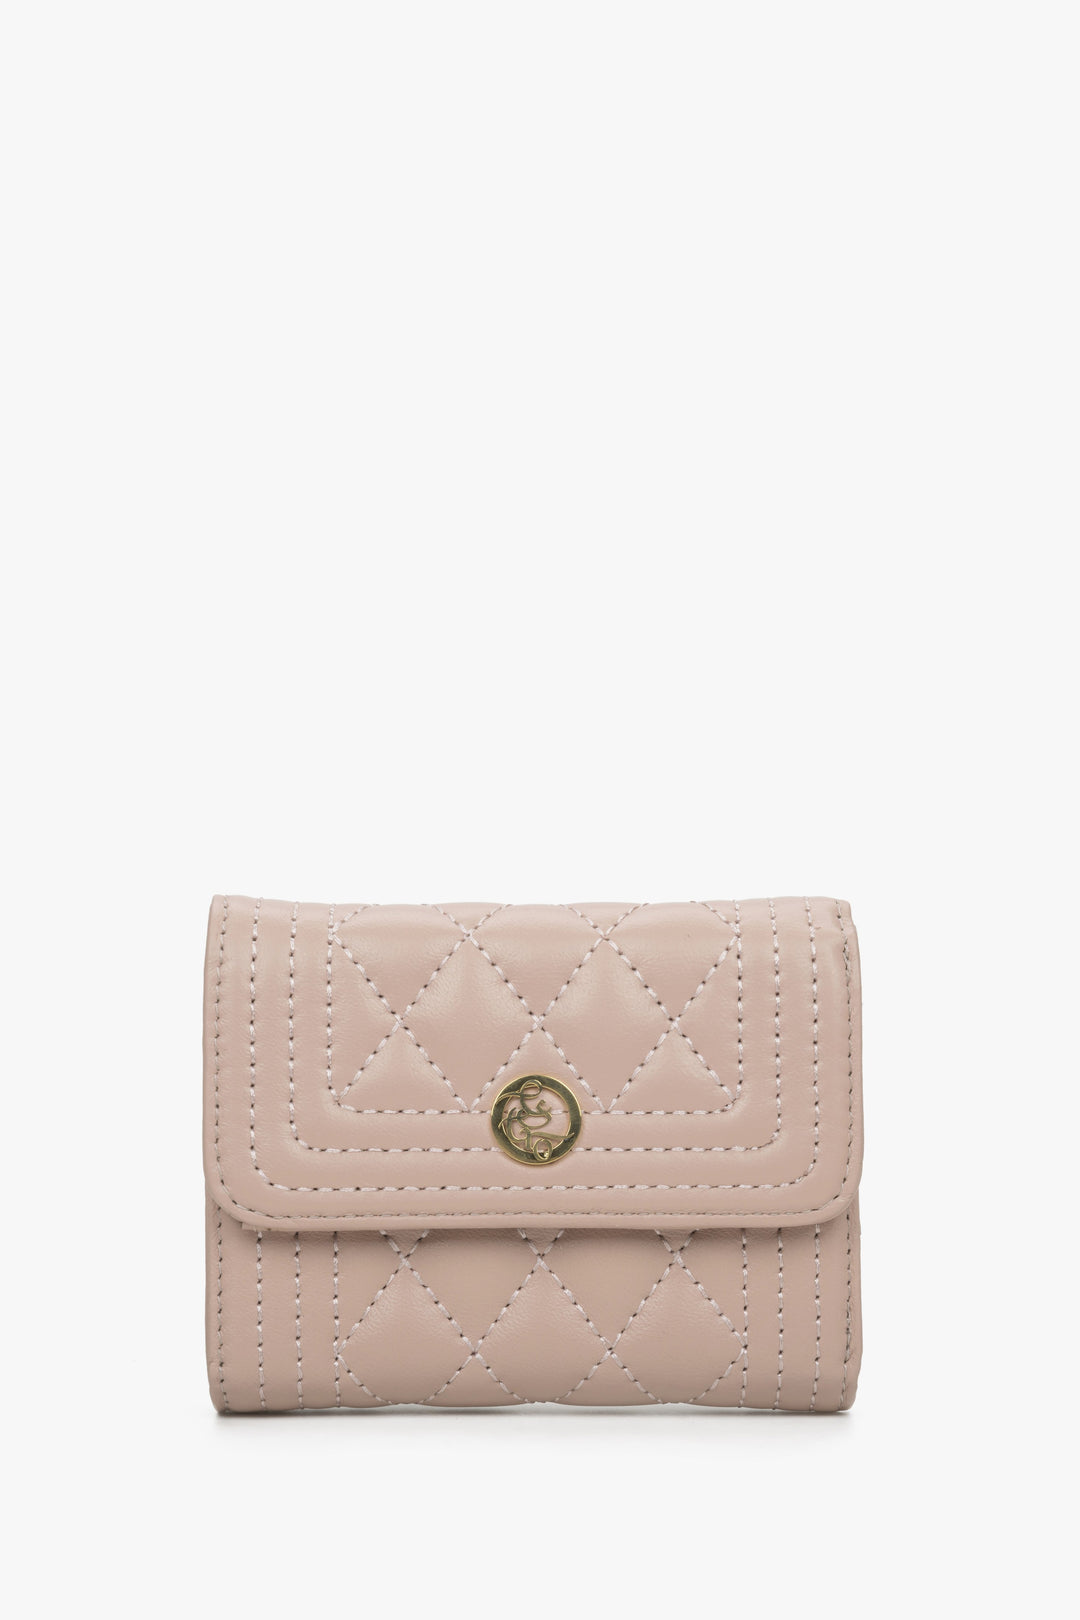 Women's Tri-Fold Light Pink Wallet with Golden Accents Estro ER00114469.